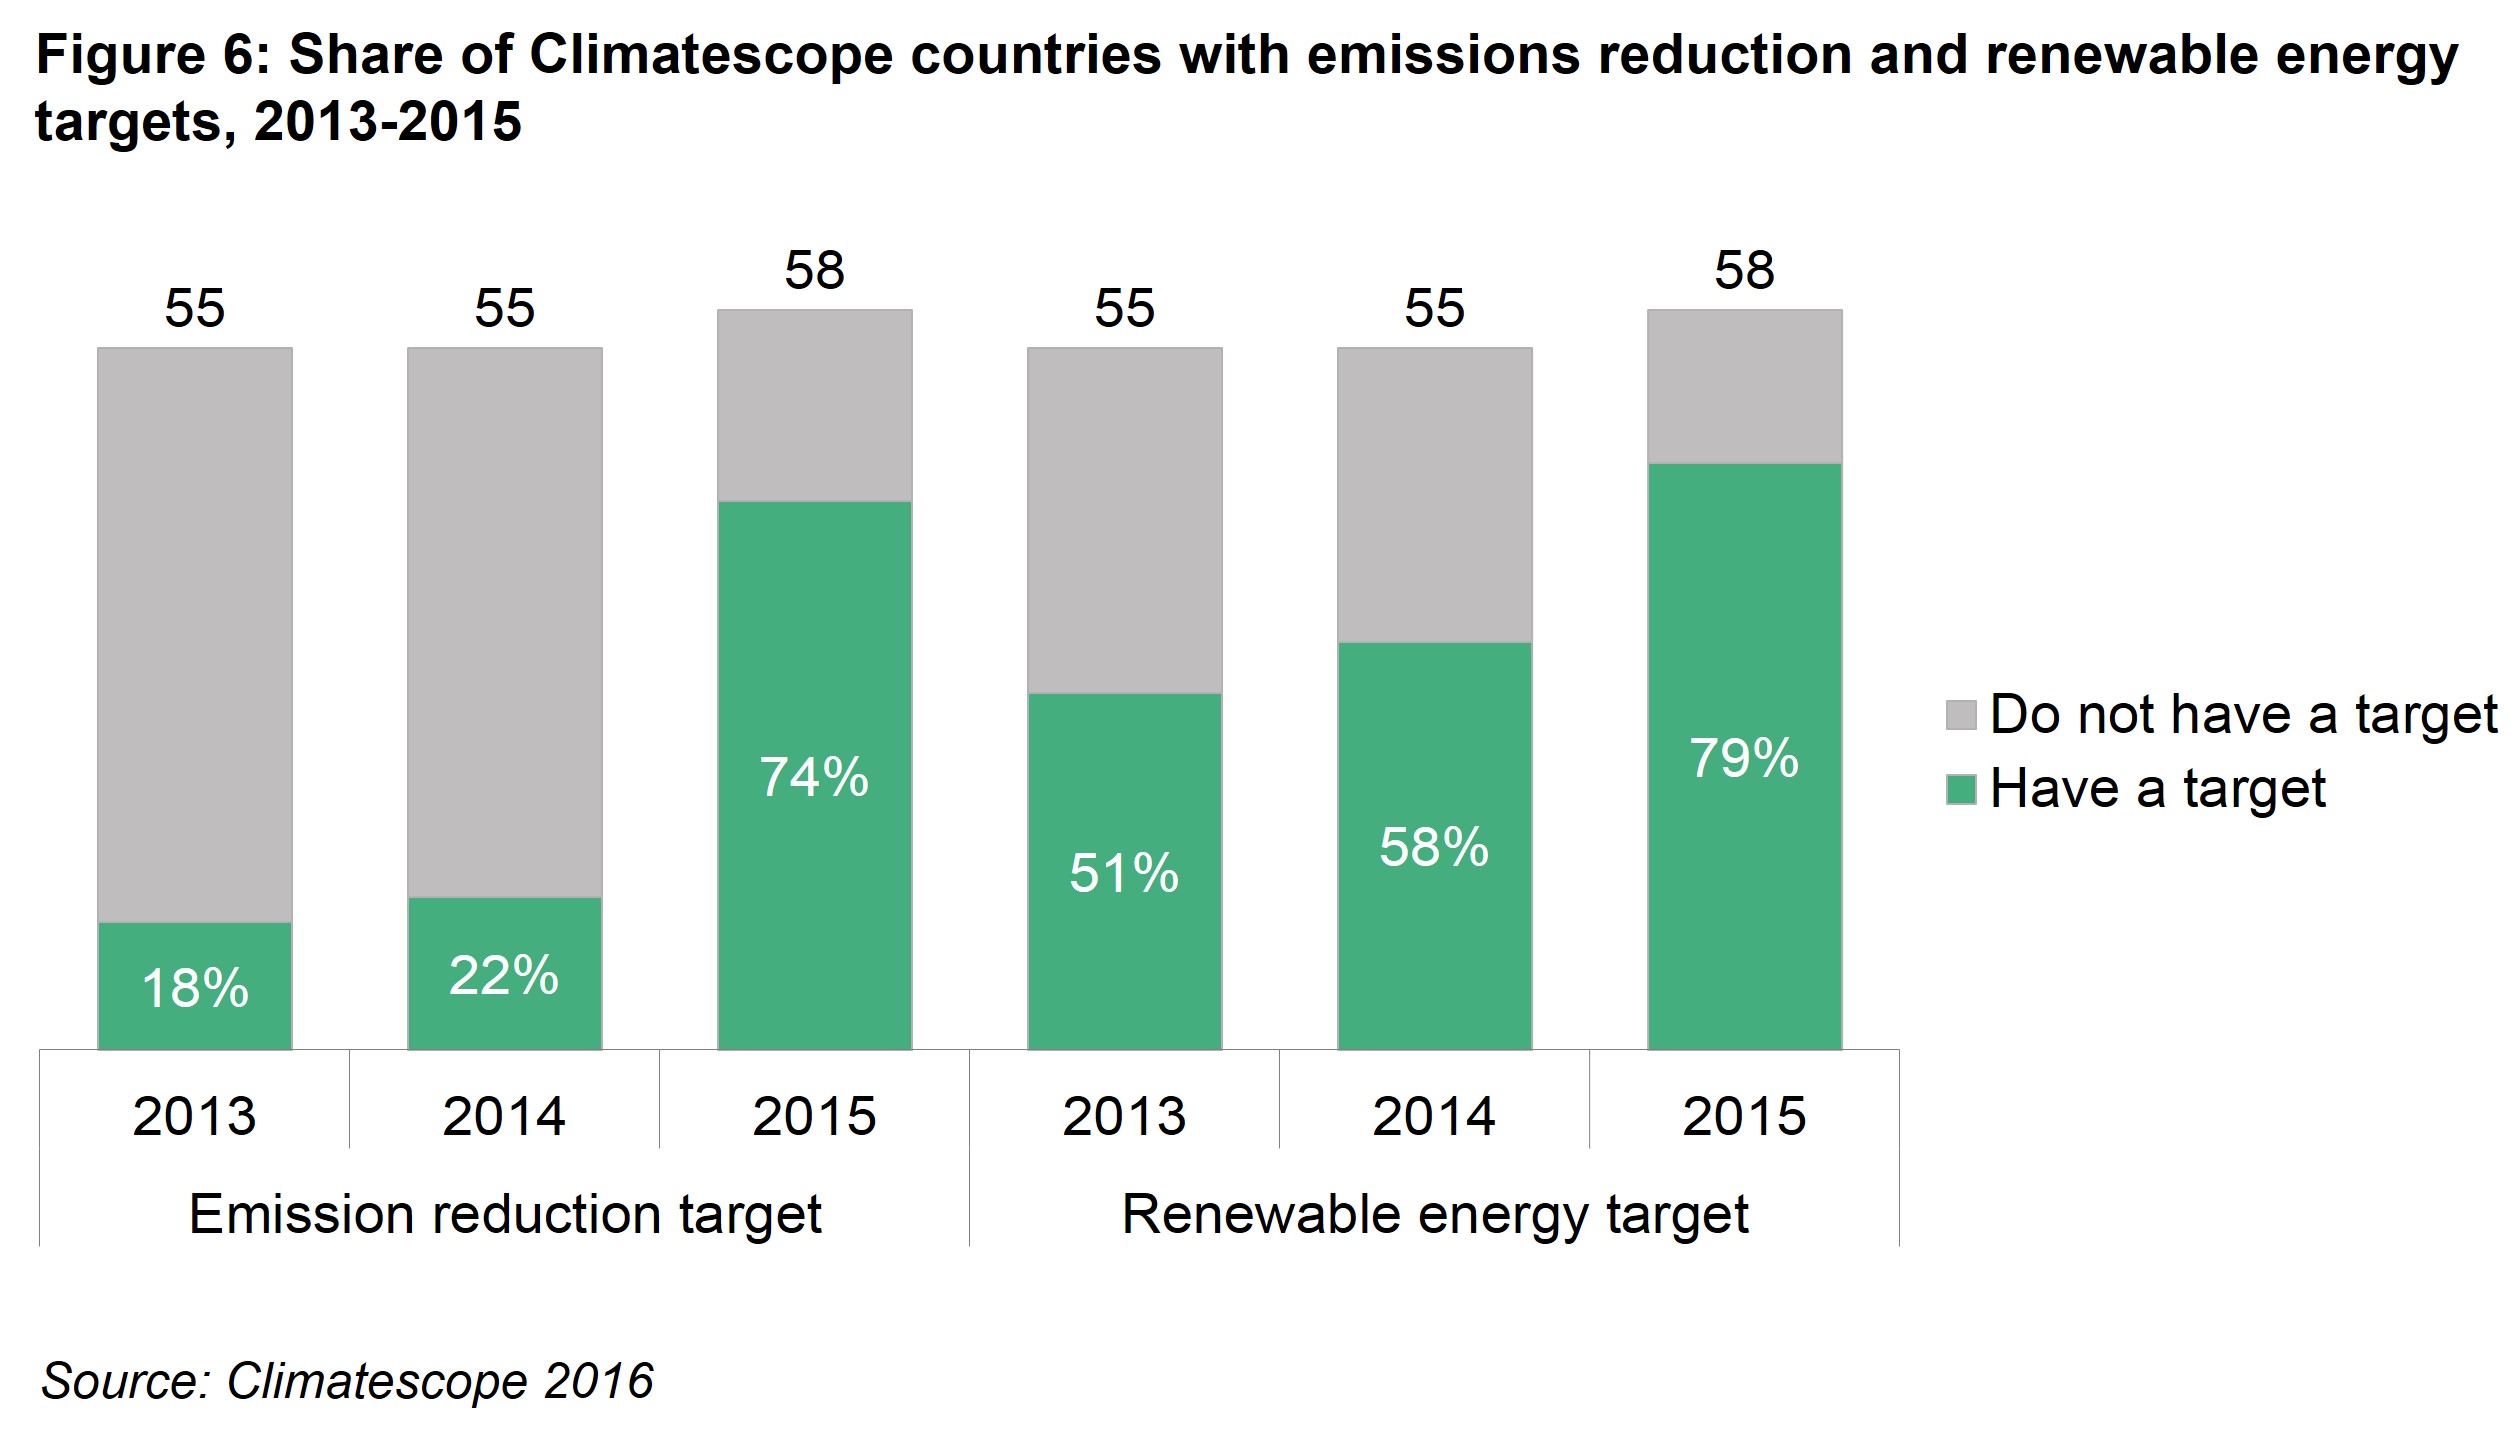 Executive Summary Fig 6 - Share of Climatescope countries with emissions reduction and renewable energy targets, 2013-2015